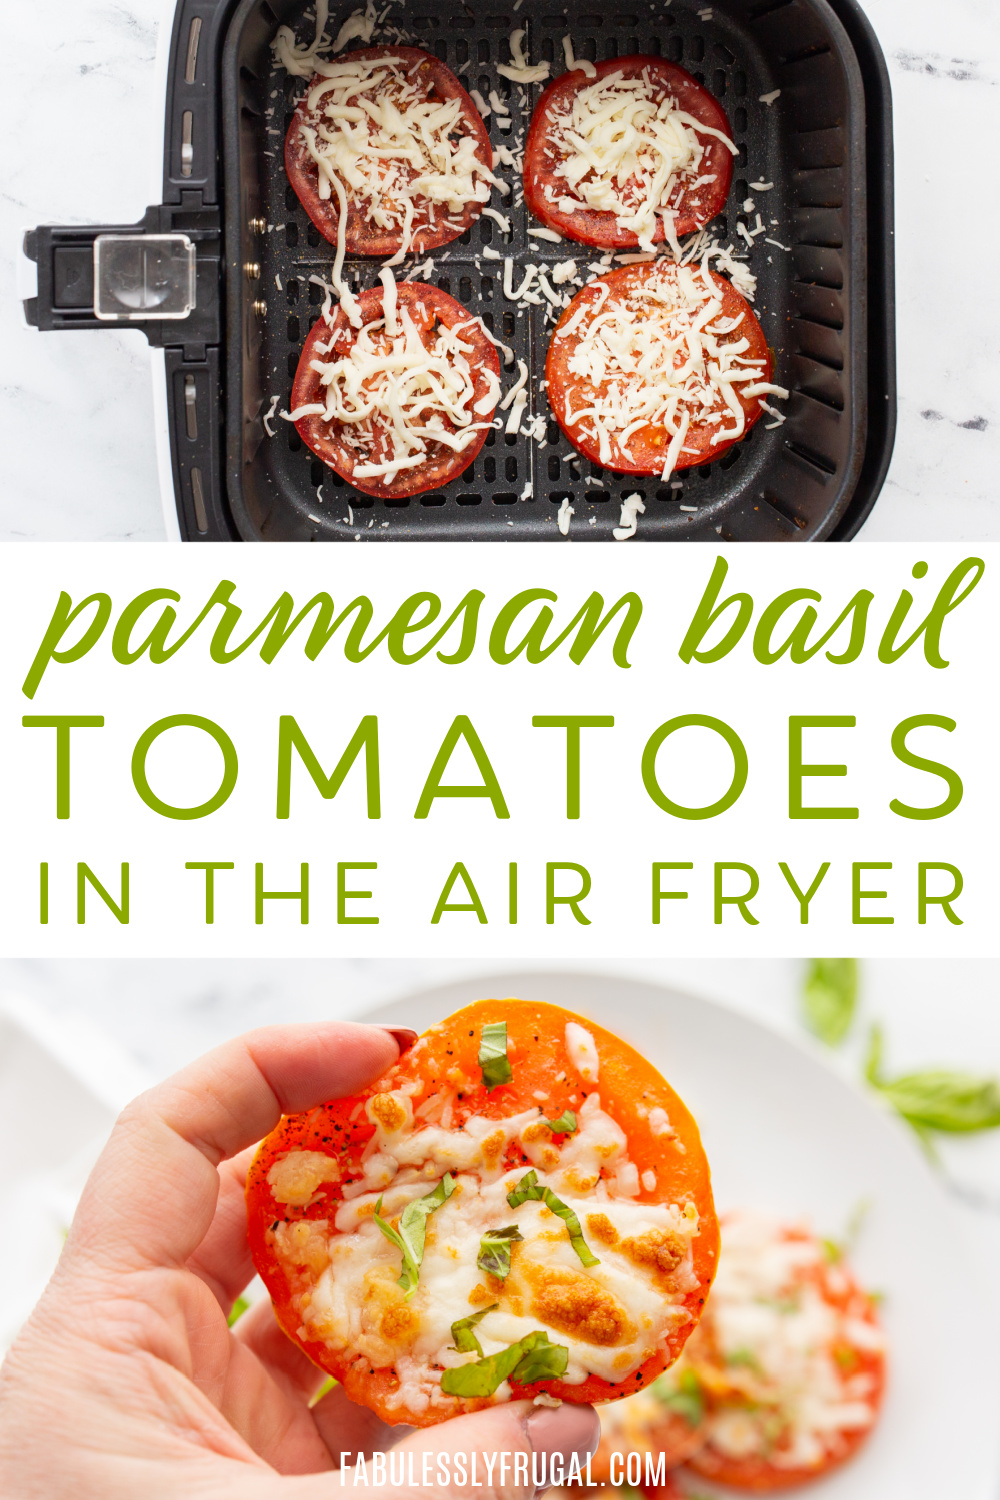 parmesan basil tomatoes in the air fryer